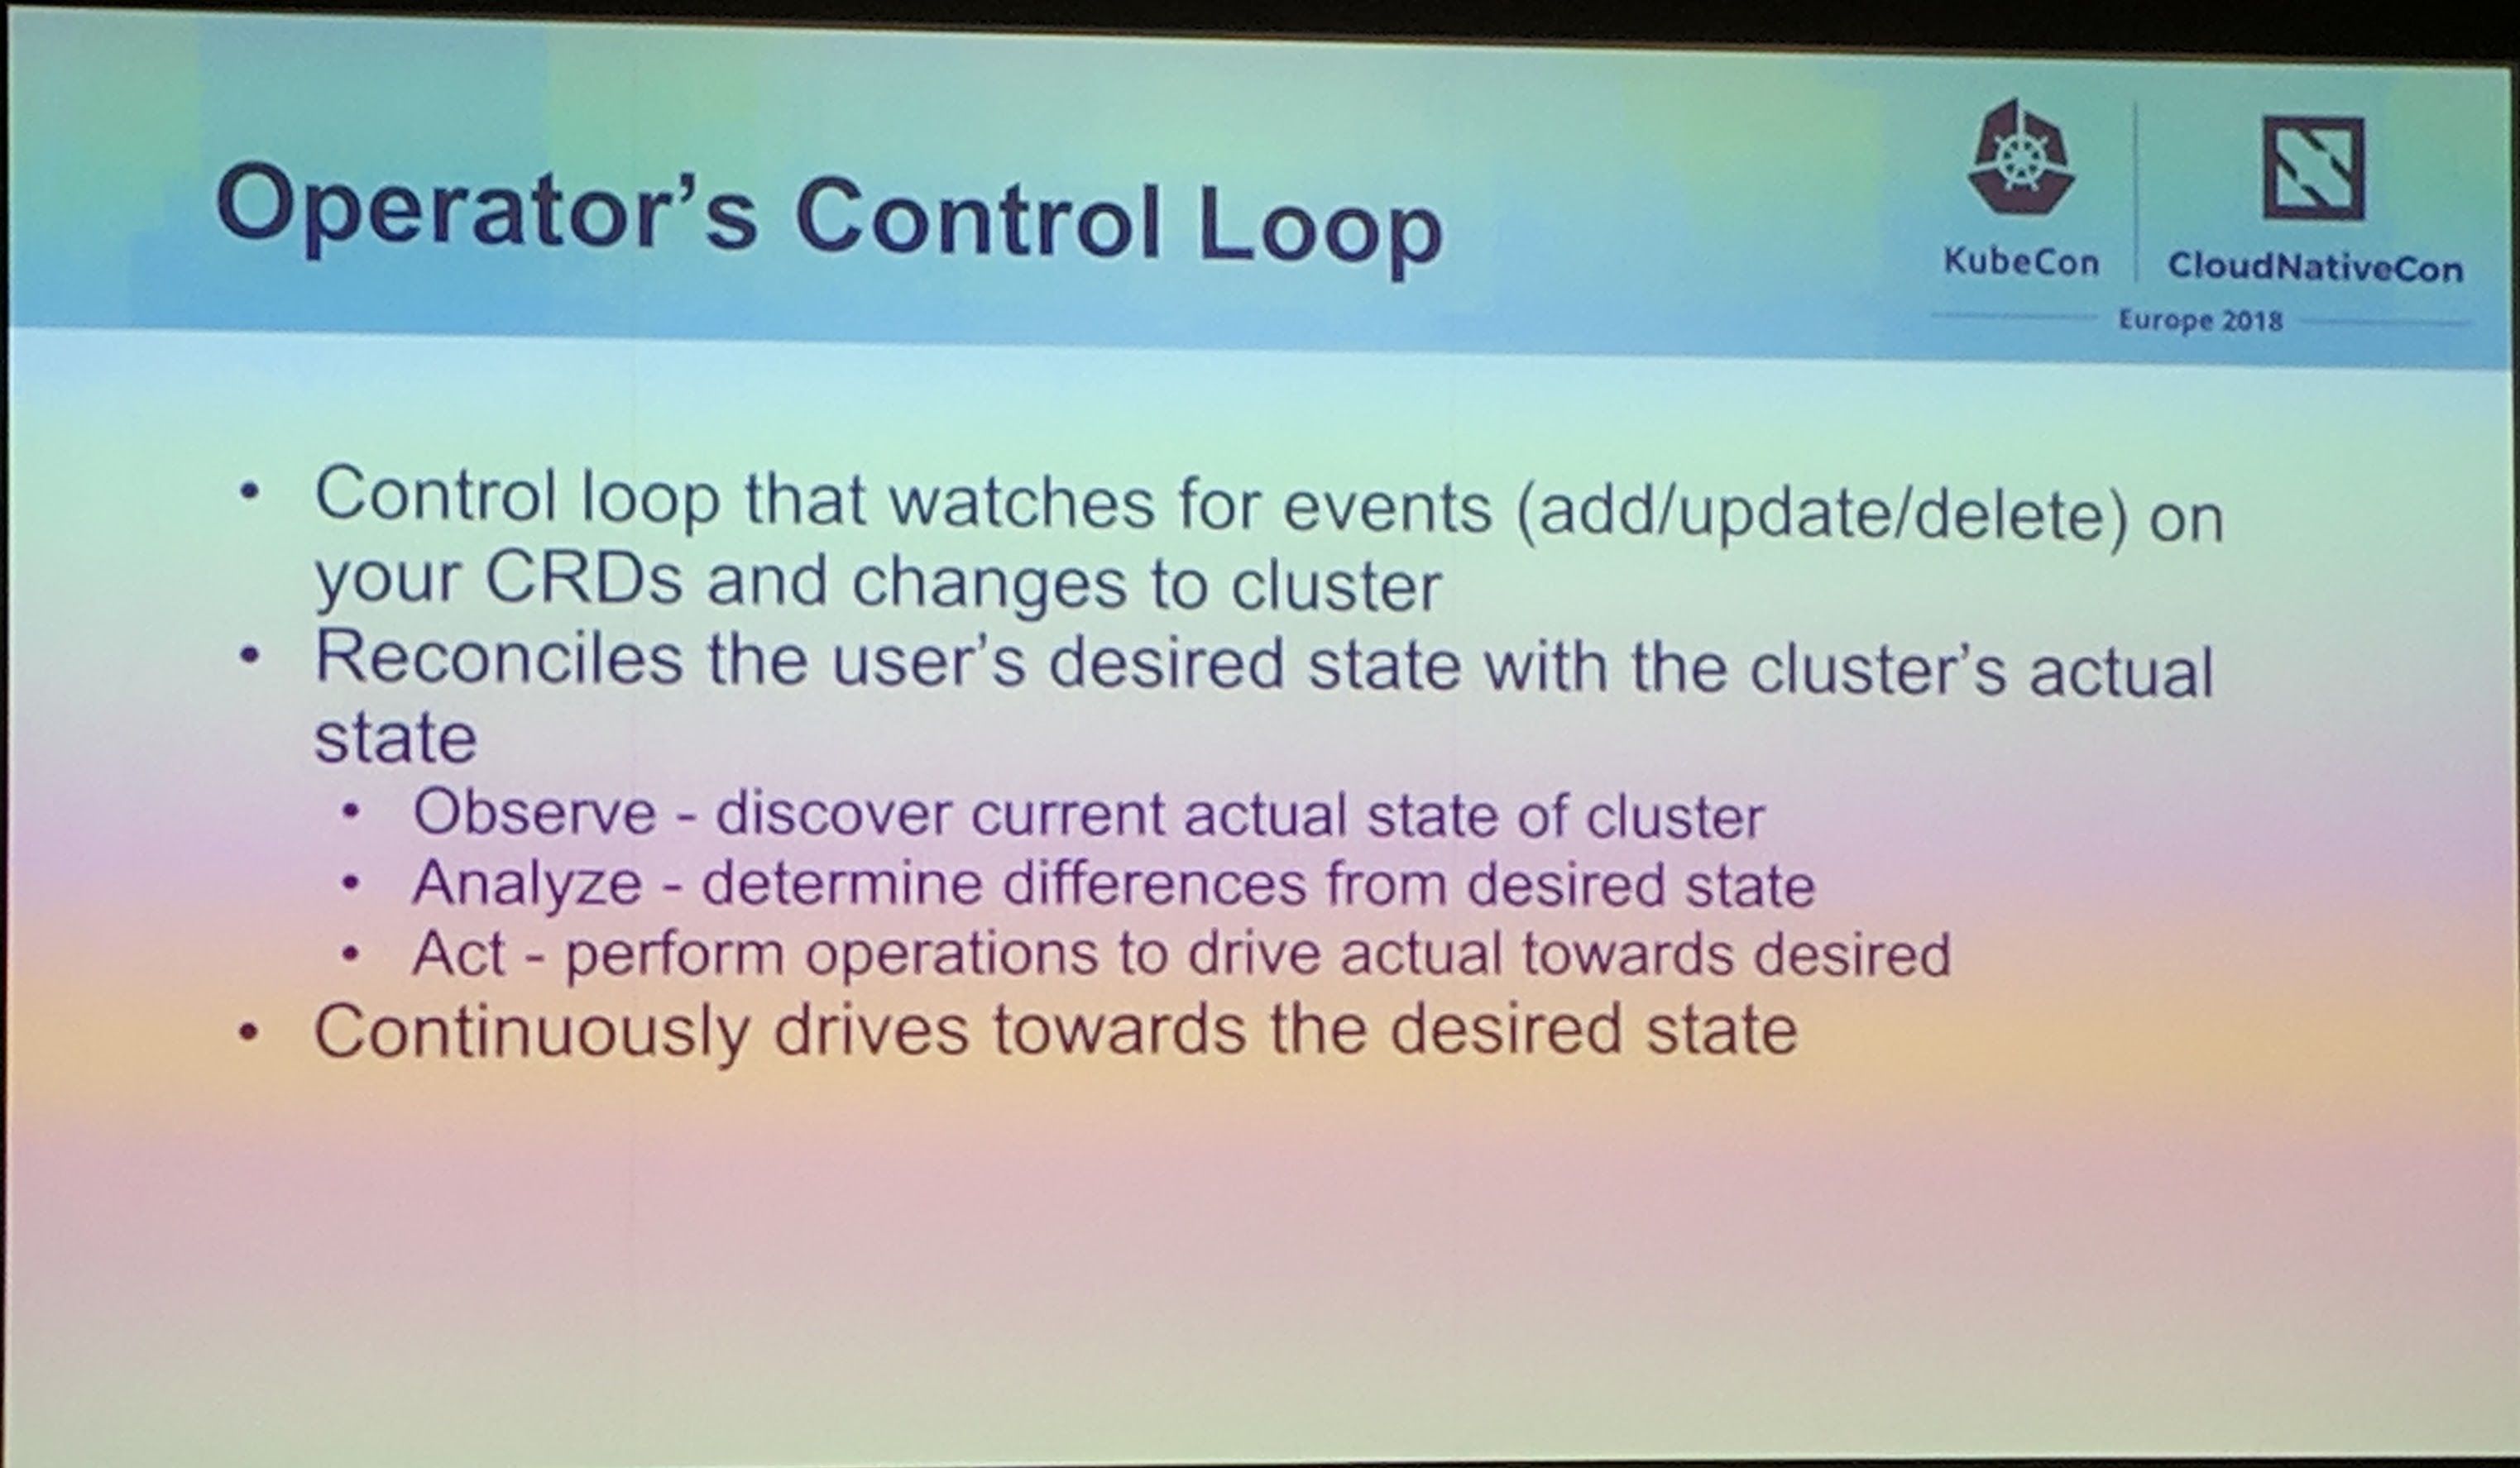 KubeCon - Talk - Kubernetes Runs Anywhere, but Does your Data? - Operator's Control Loop